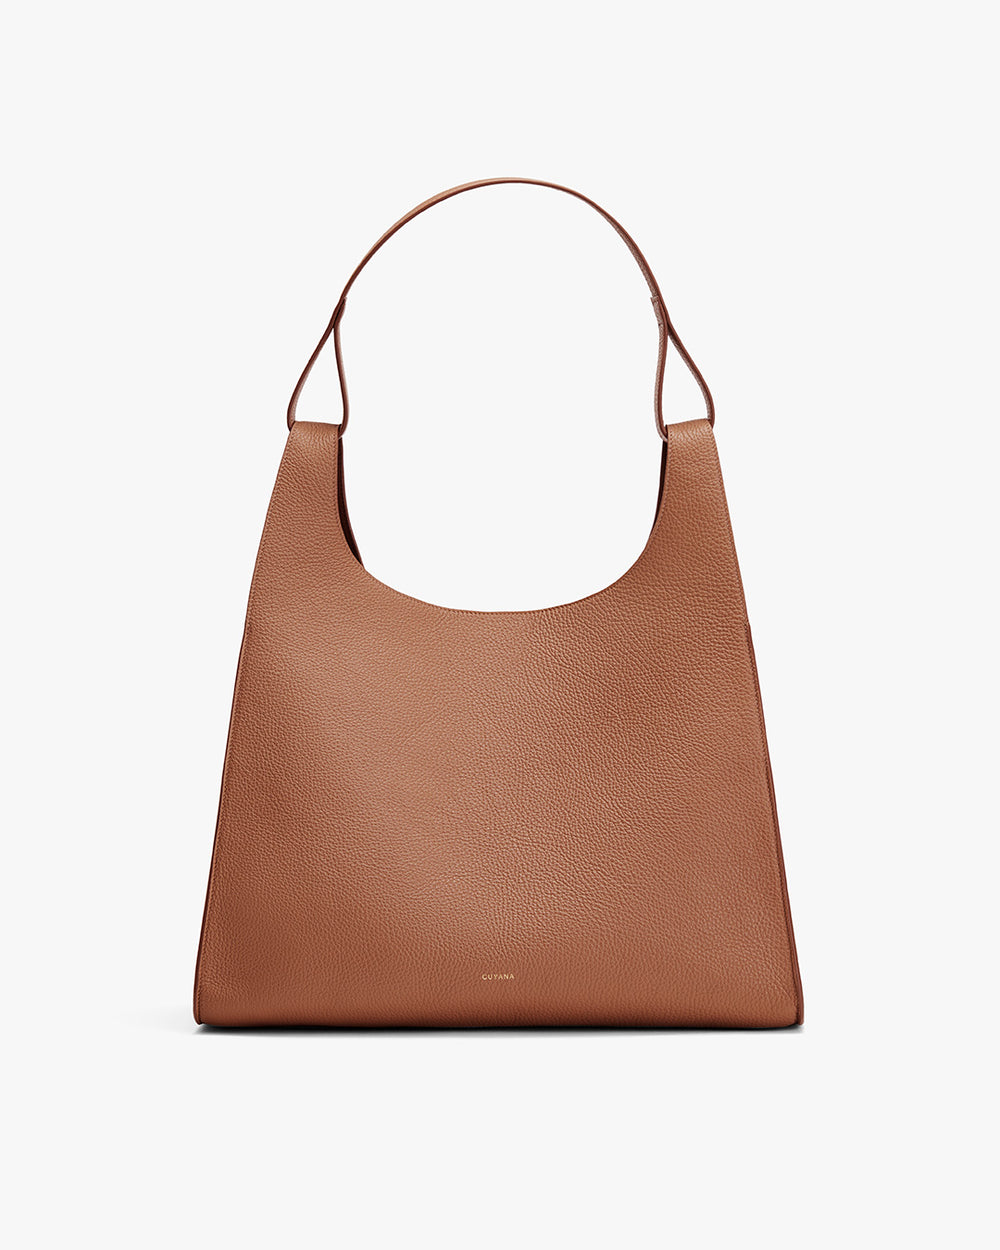 Handbag with a single handle and curved top edge displayed against a plain background.